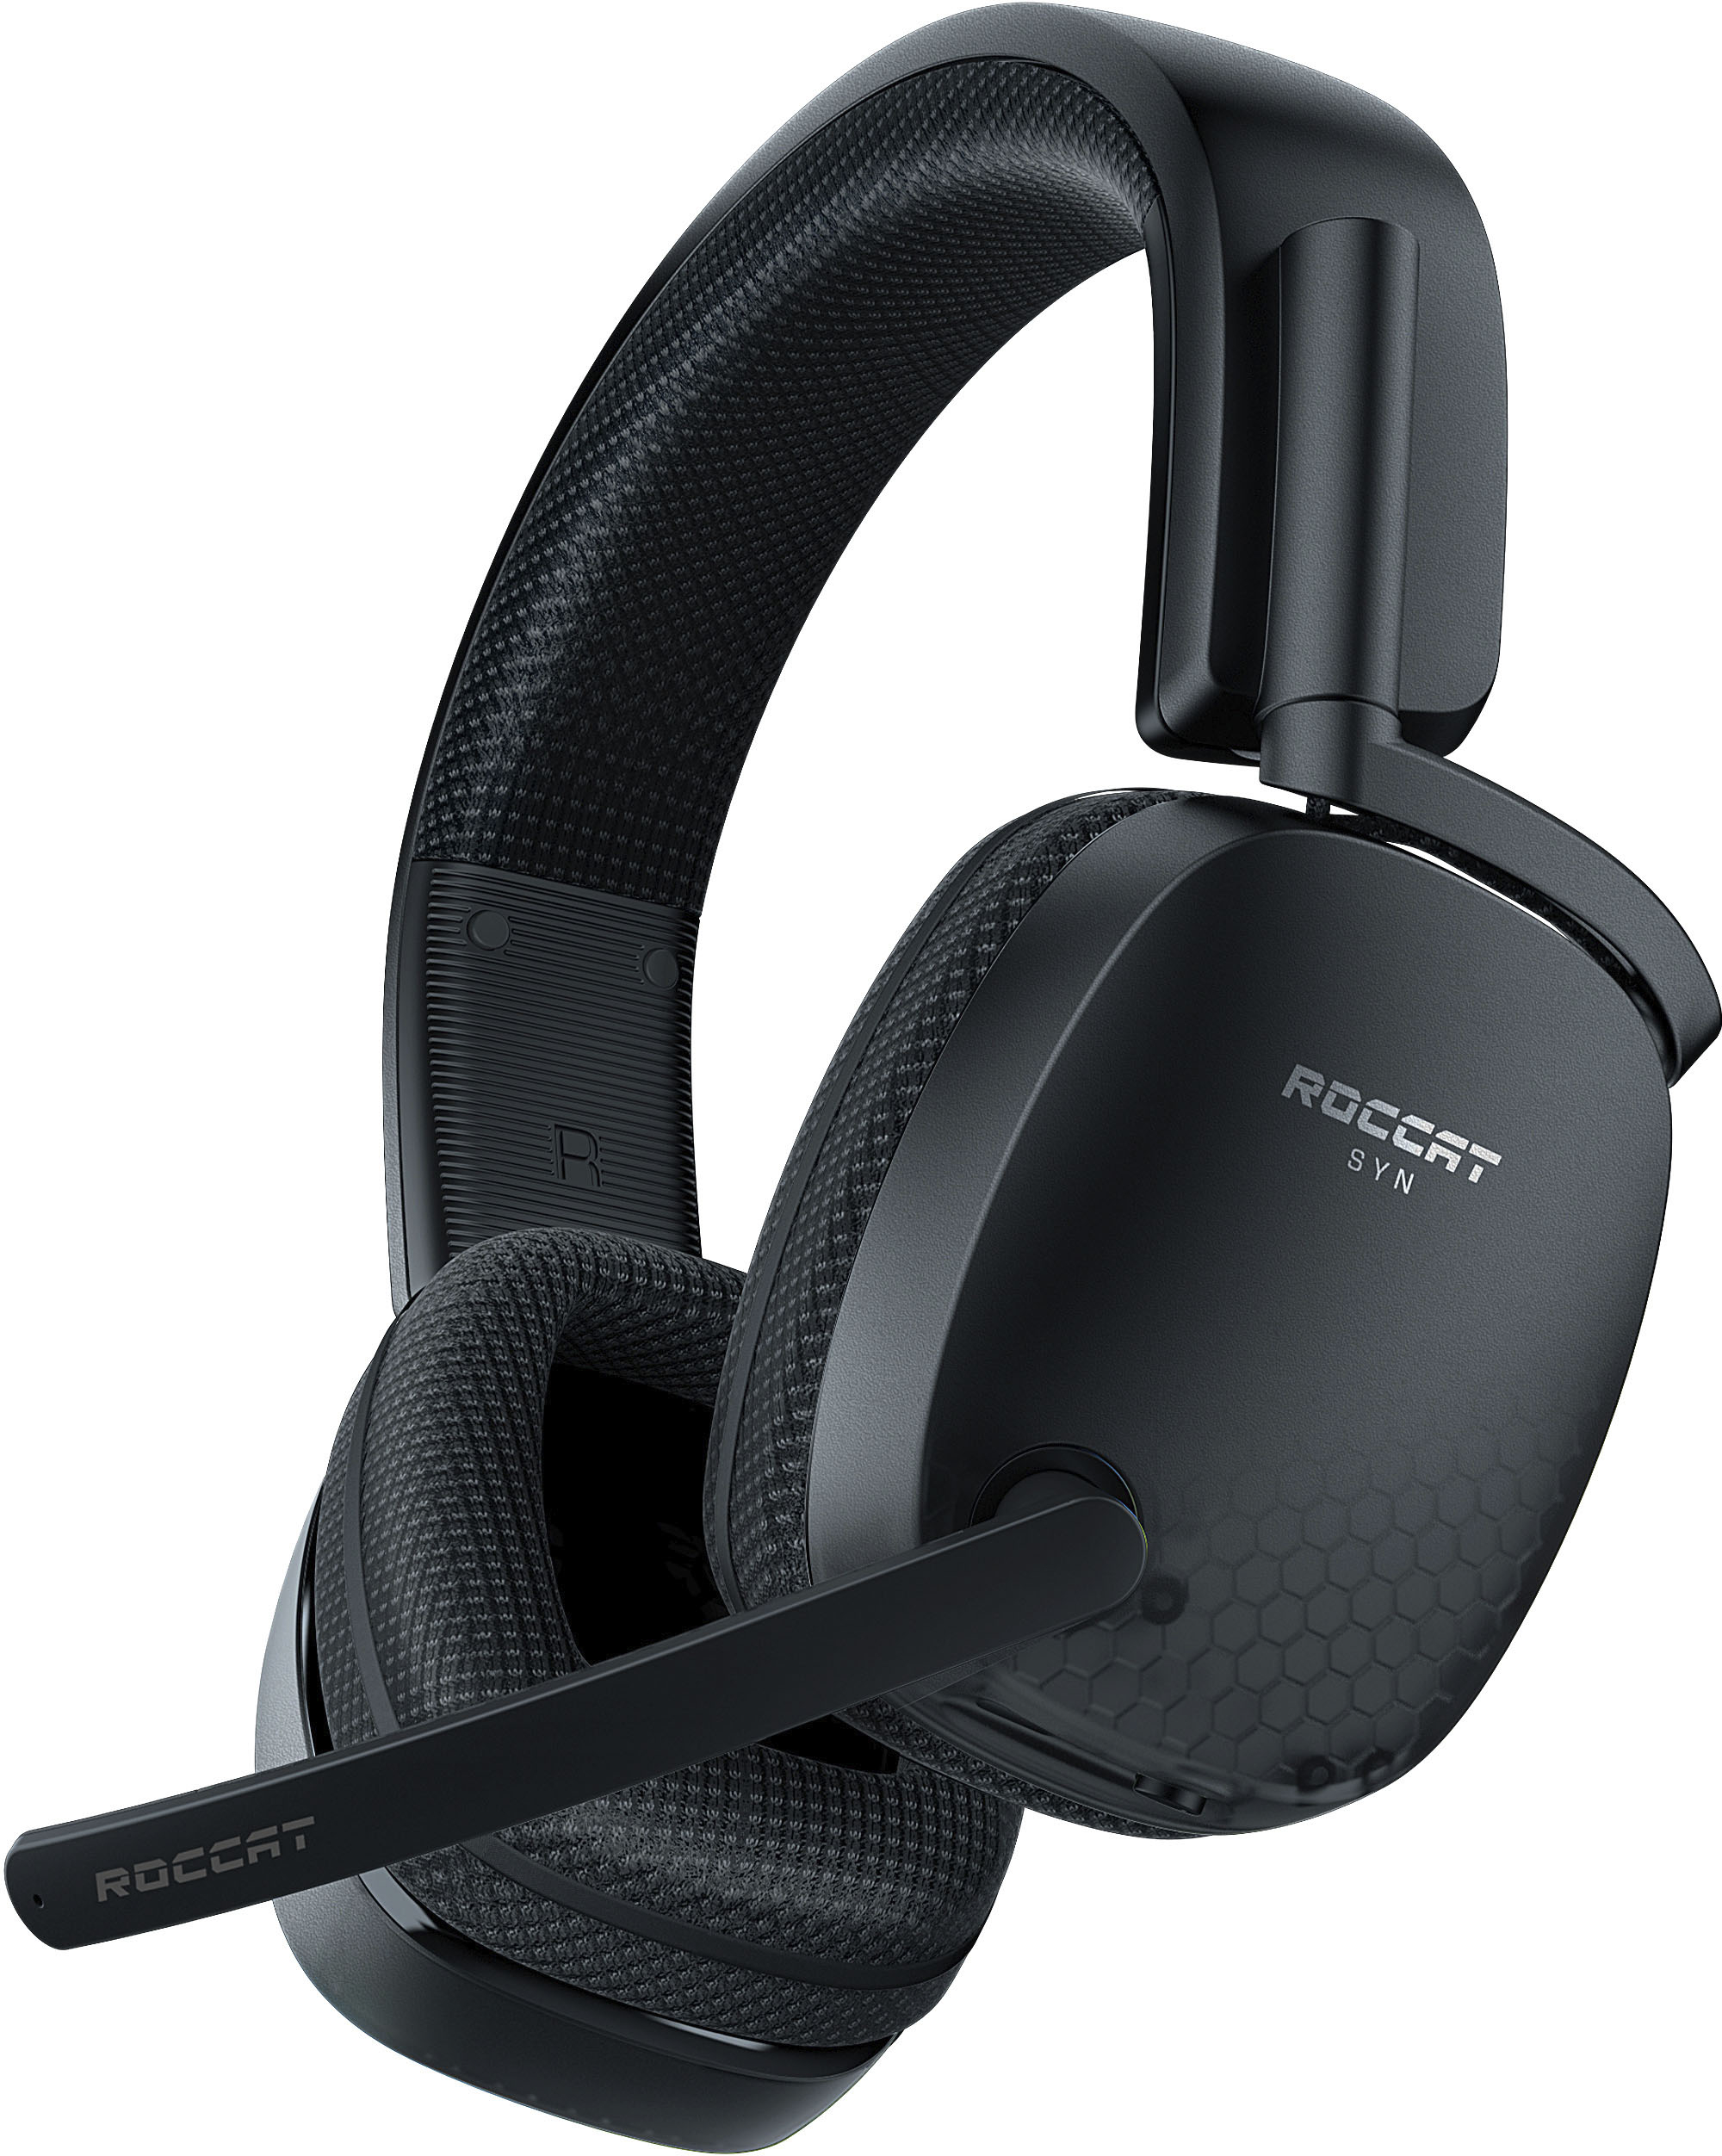 SYN MAX AIR Wireless Headset Review: A Sturdy Choice For Gaming